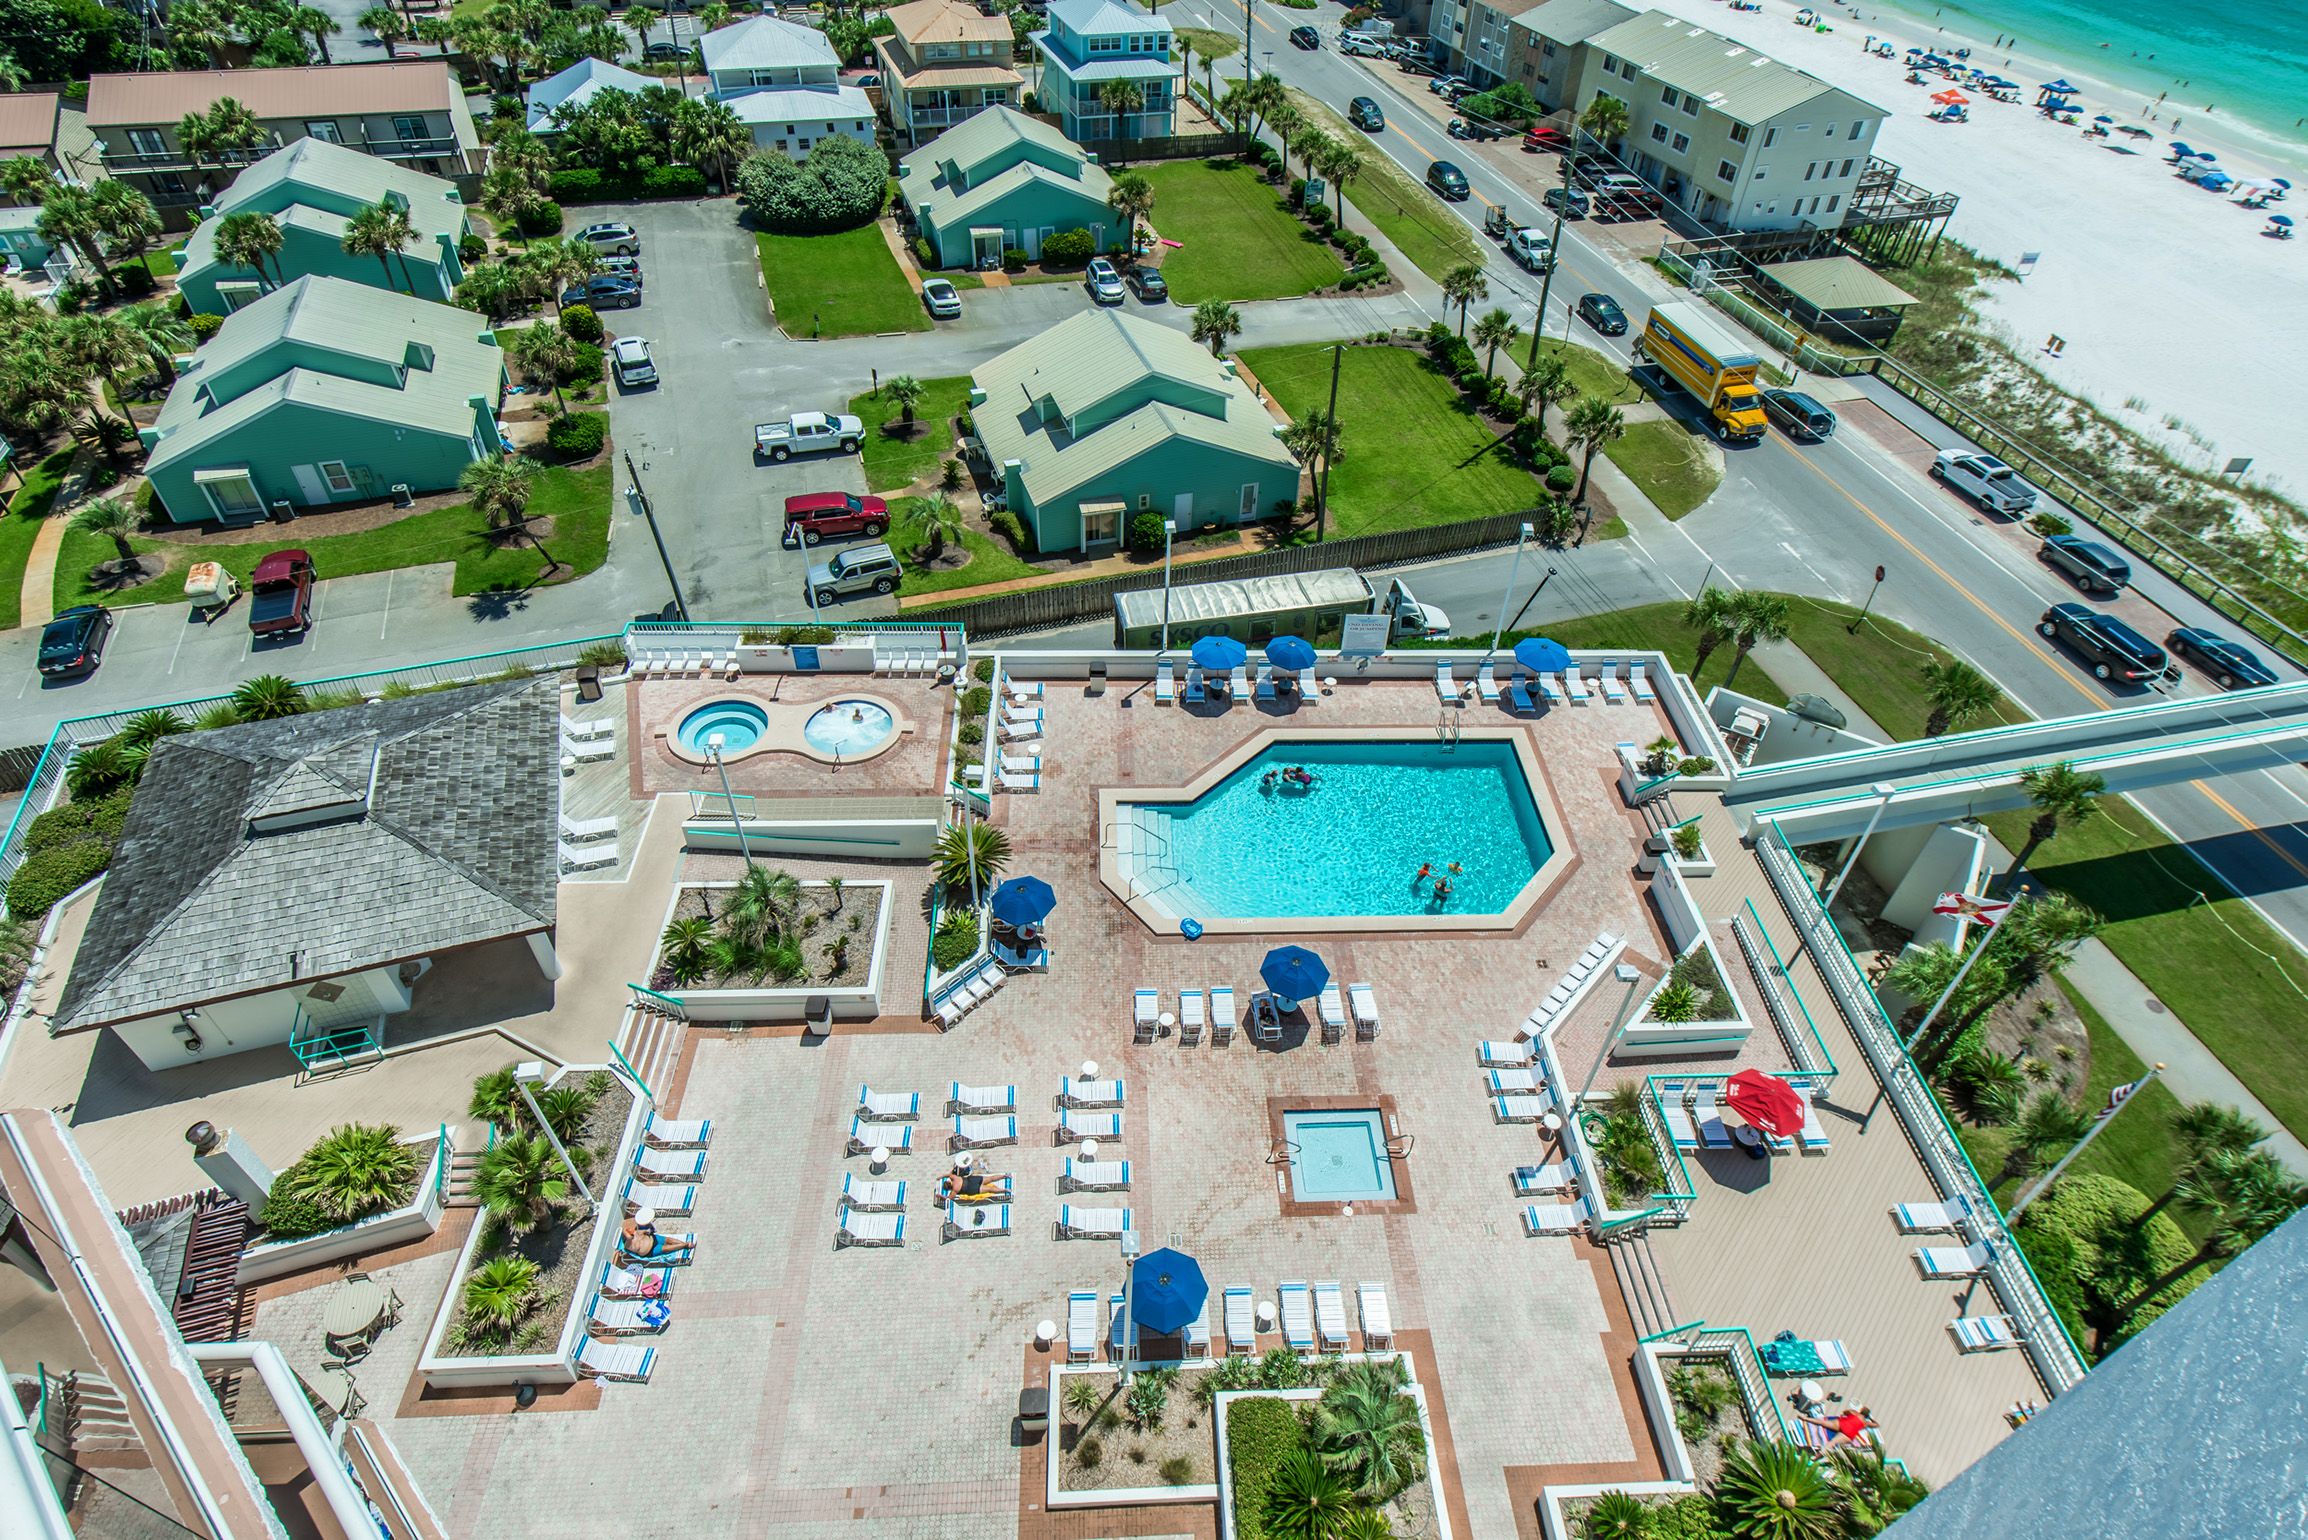 Surfside pool hot tubs and beach